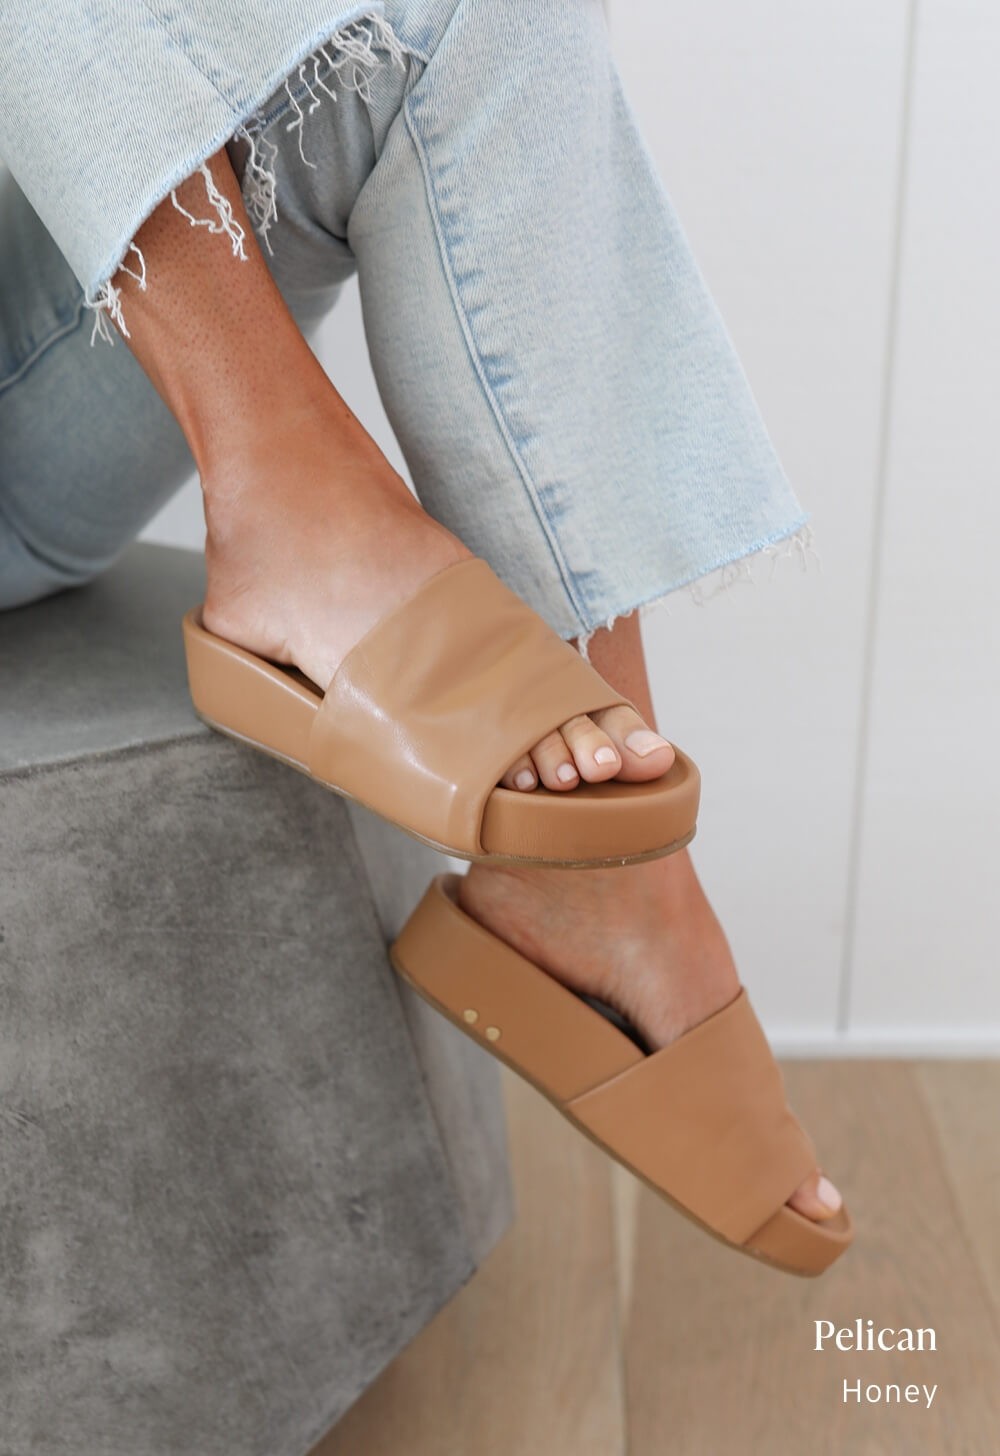 Woman wearing Pelican leather platform sandals in honey with jeans